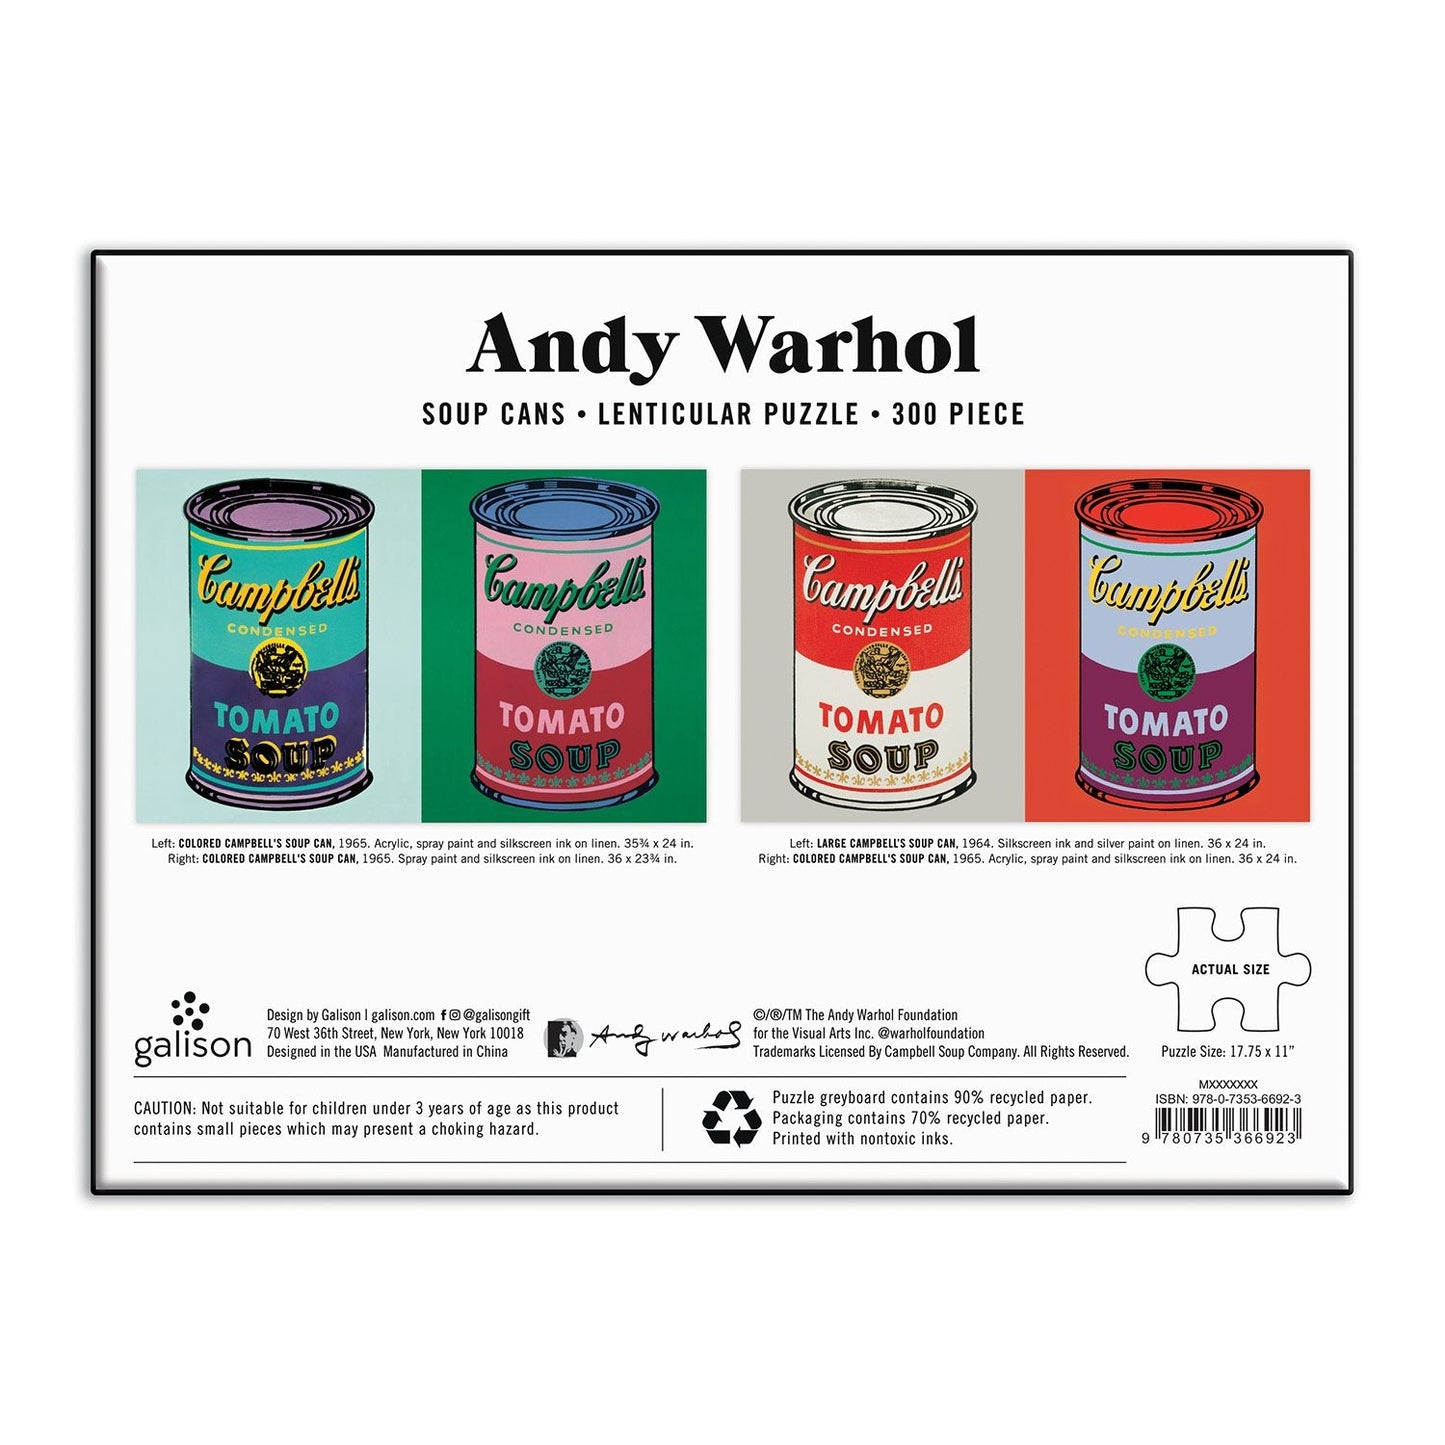 Andy Warhol Soup Cans 300 Piece Lenticular Jigsaw Puzzle